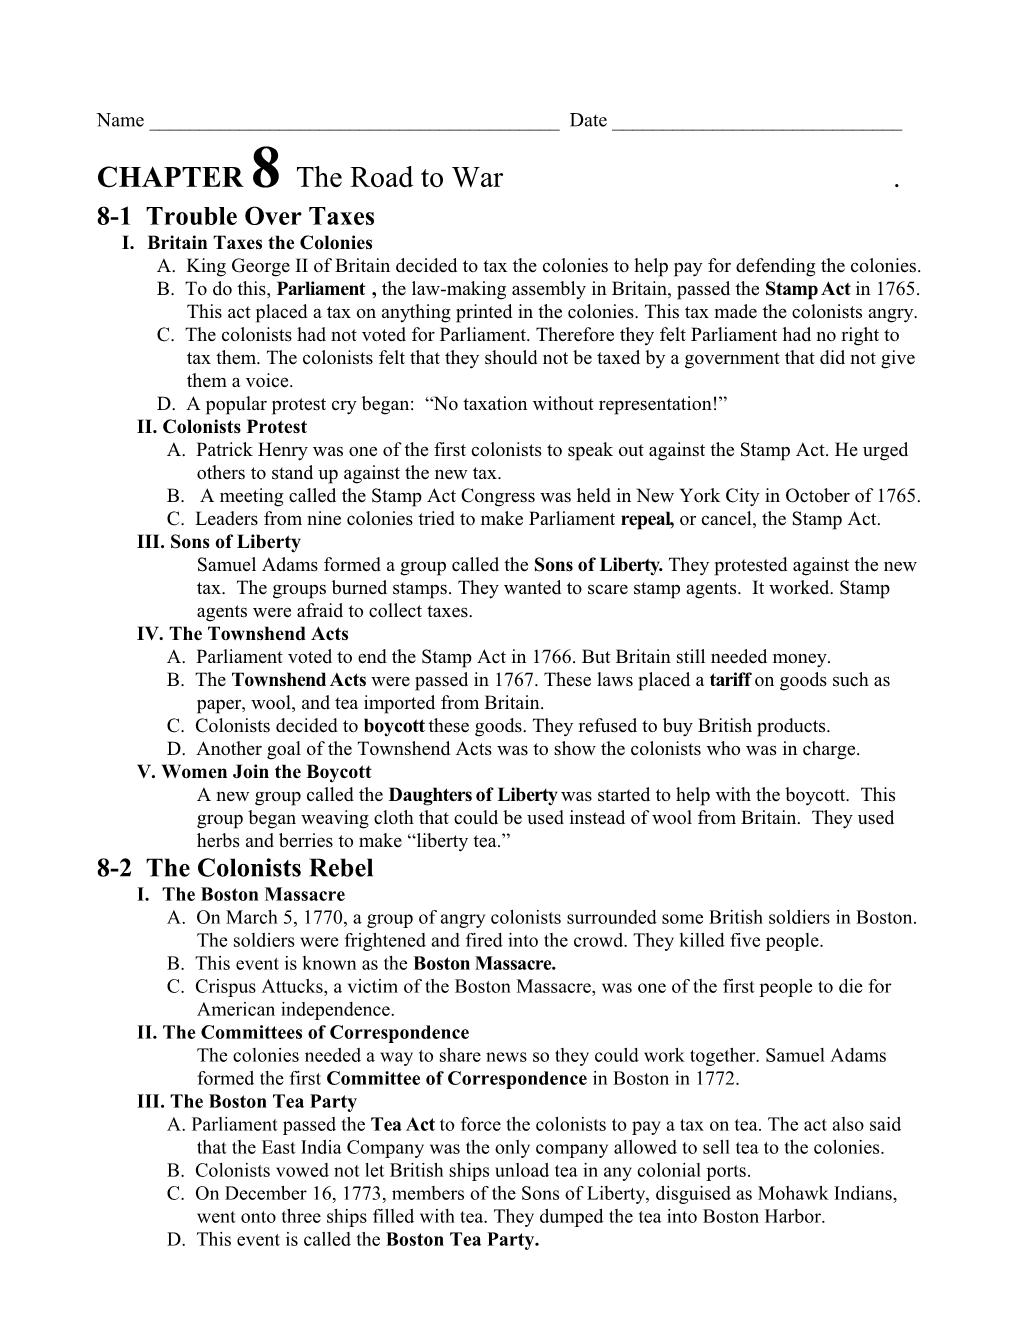 CHAPTER 8 the Road to War